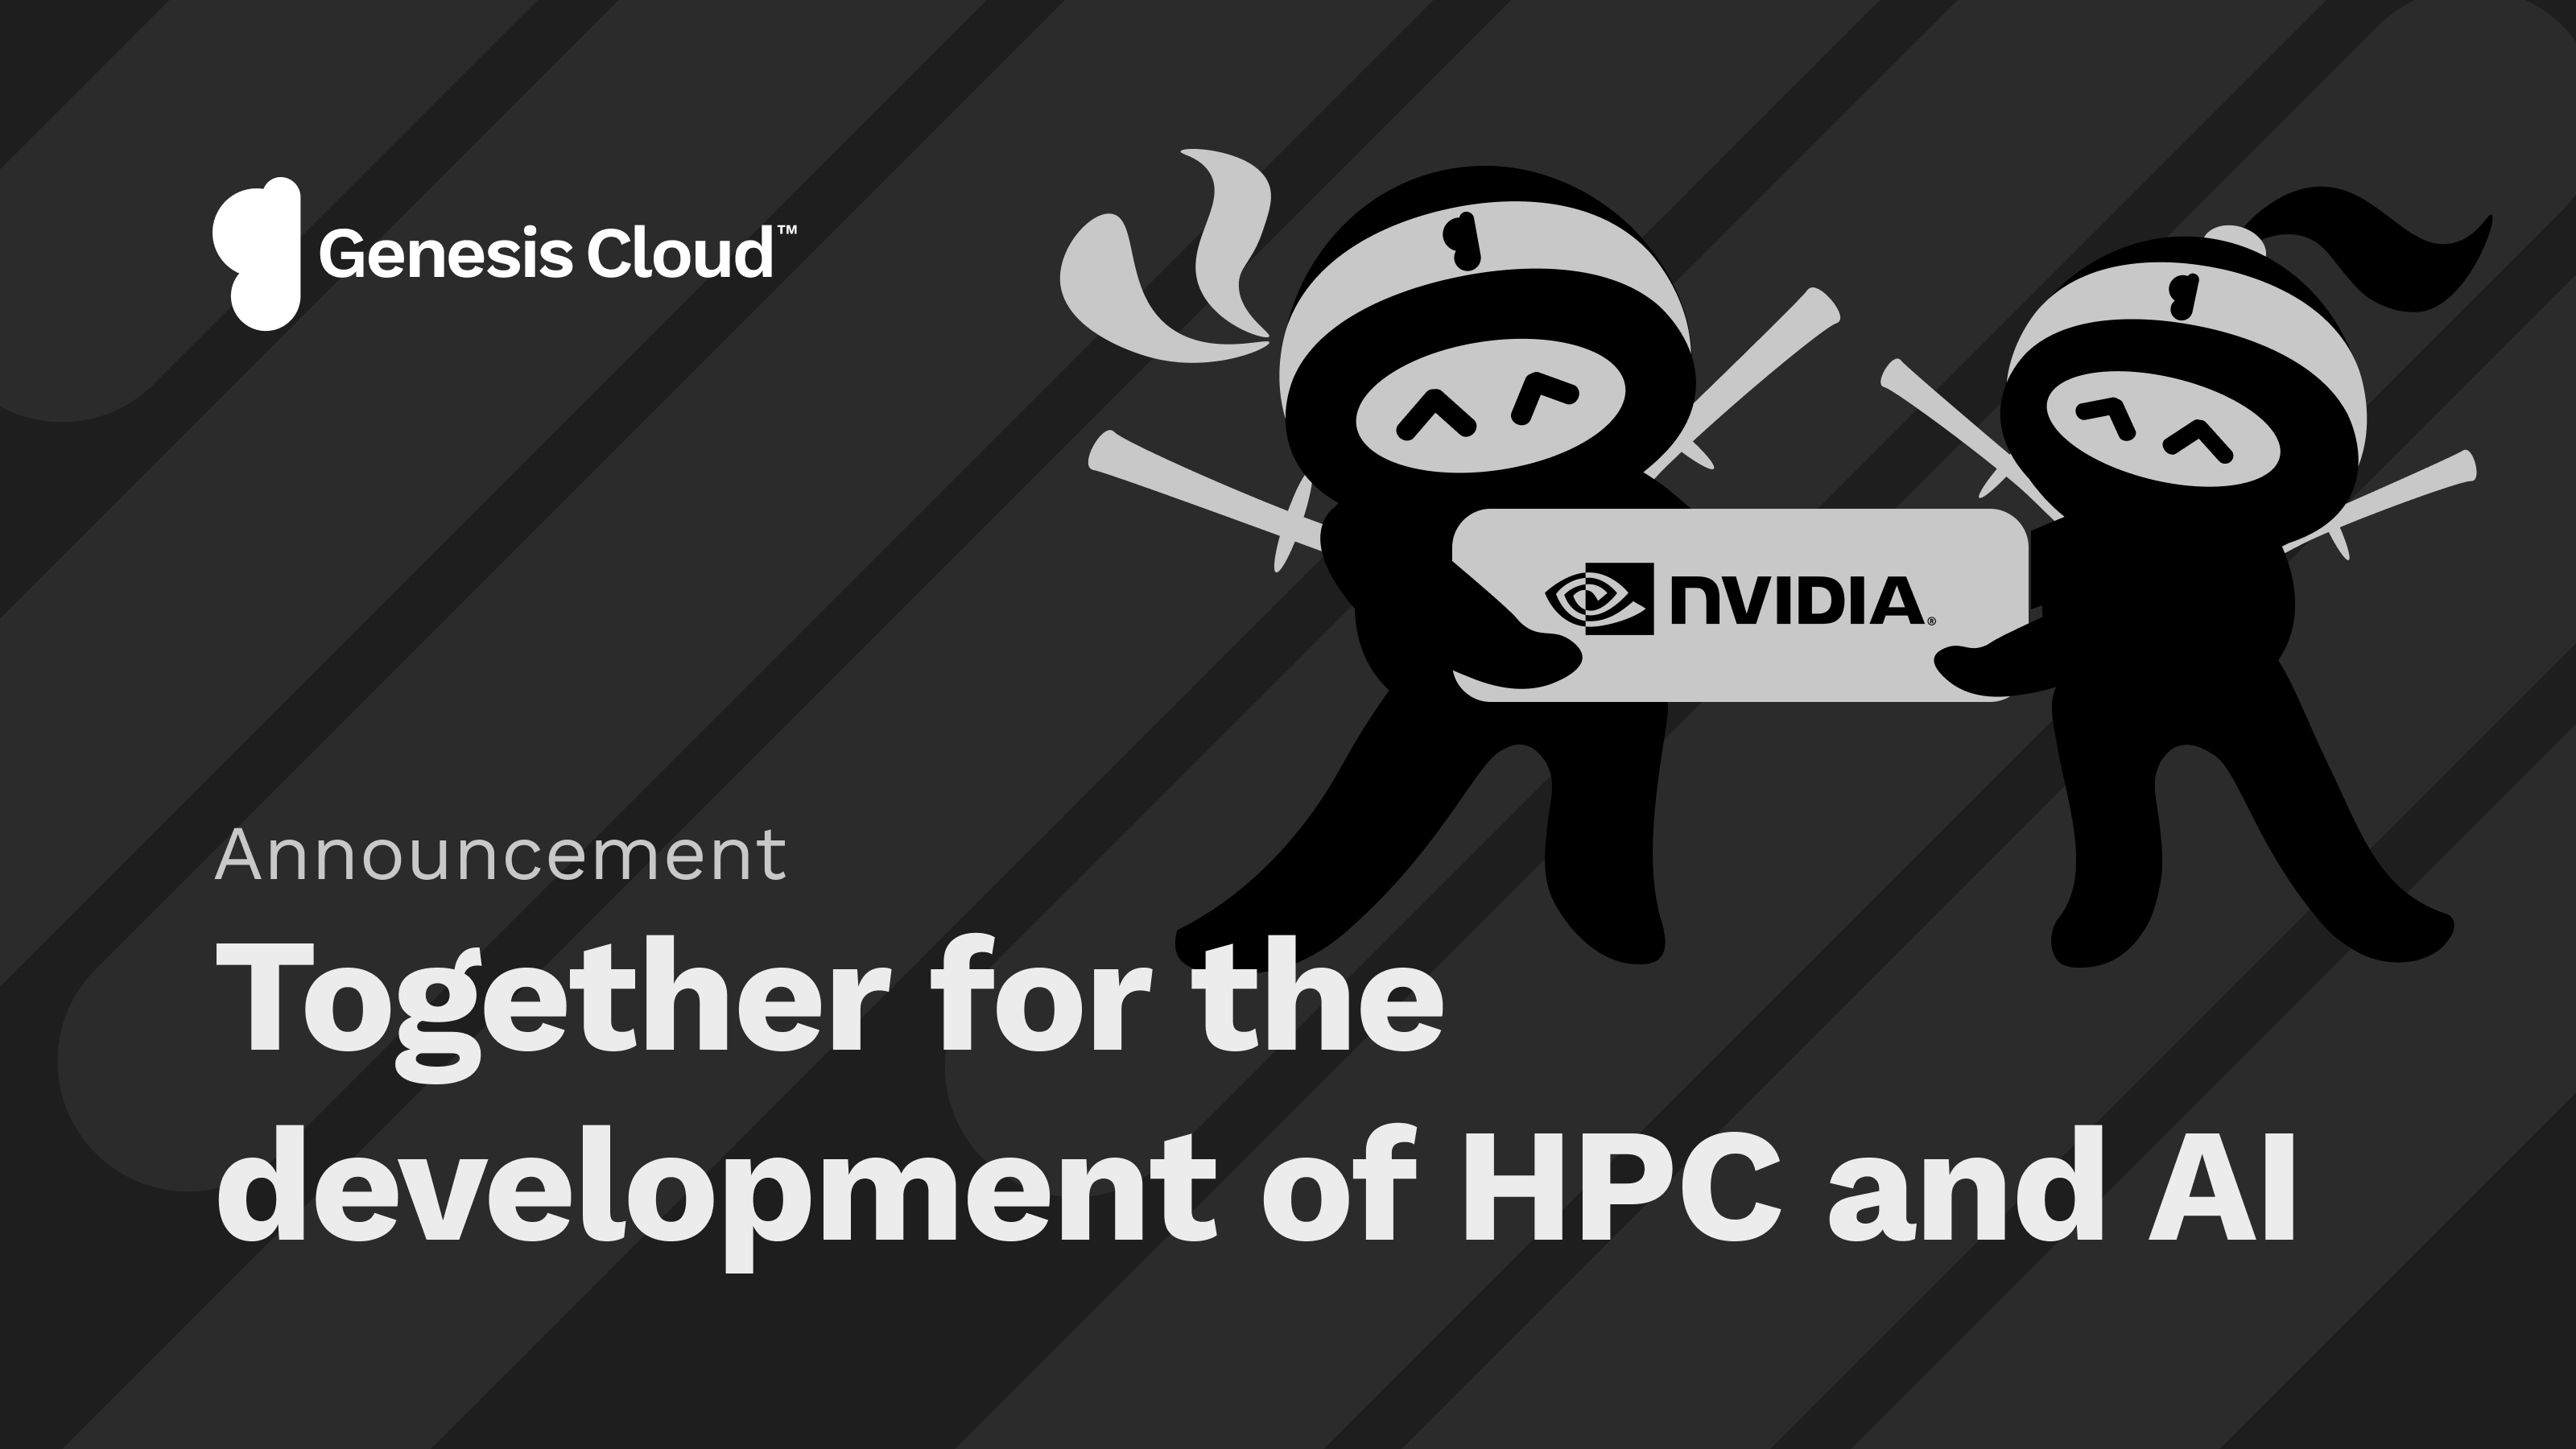 Genesis Cloud and NVIDIA: Together for the development of HPC and AI